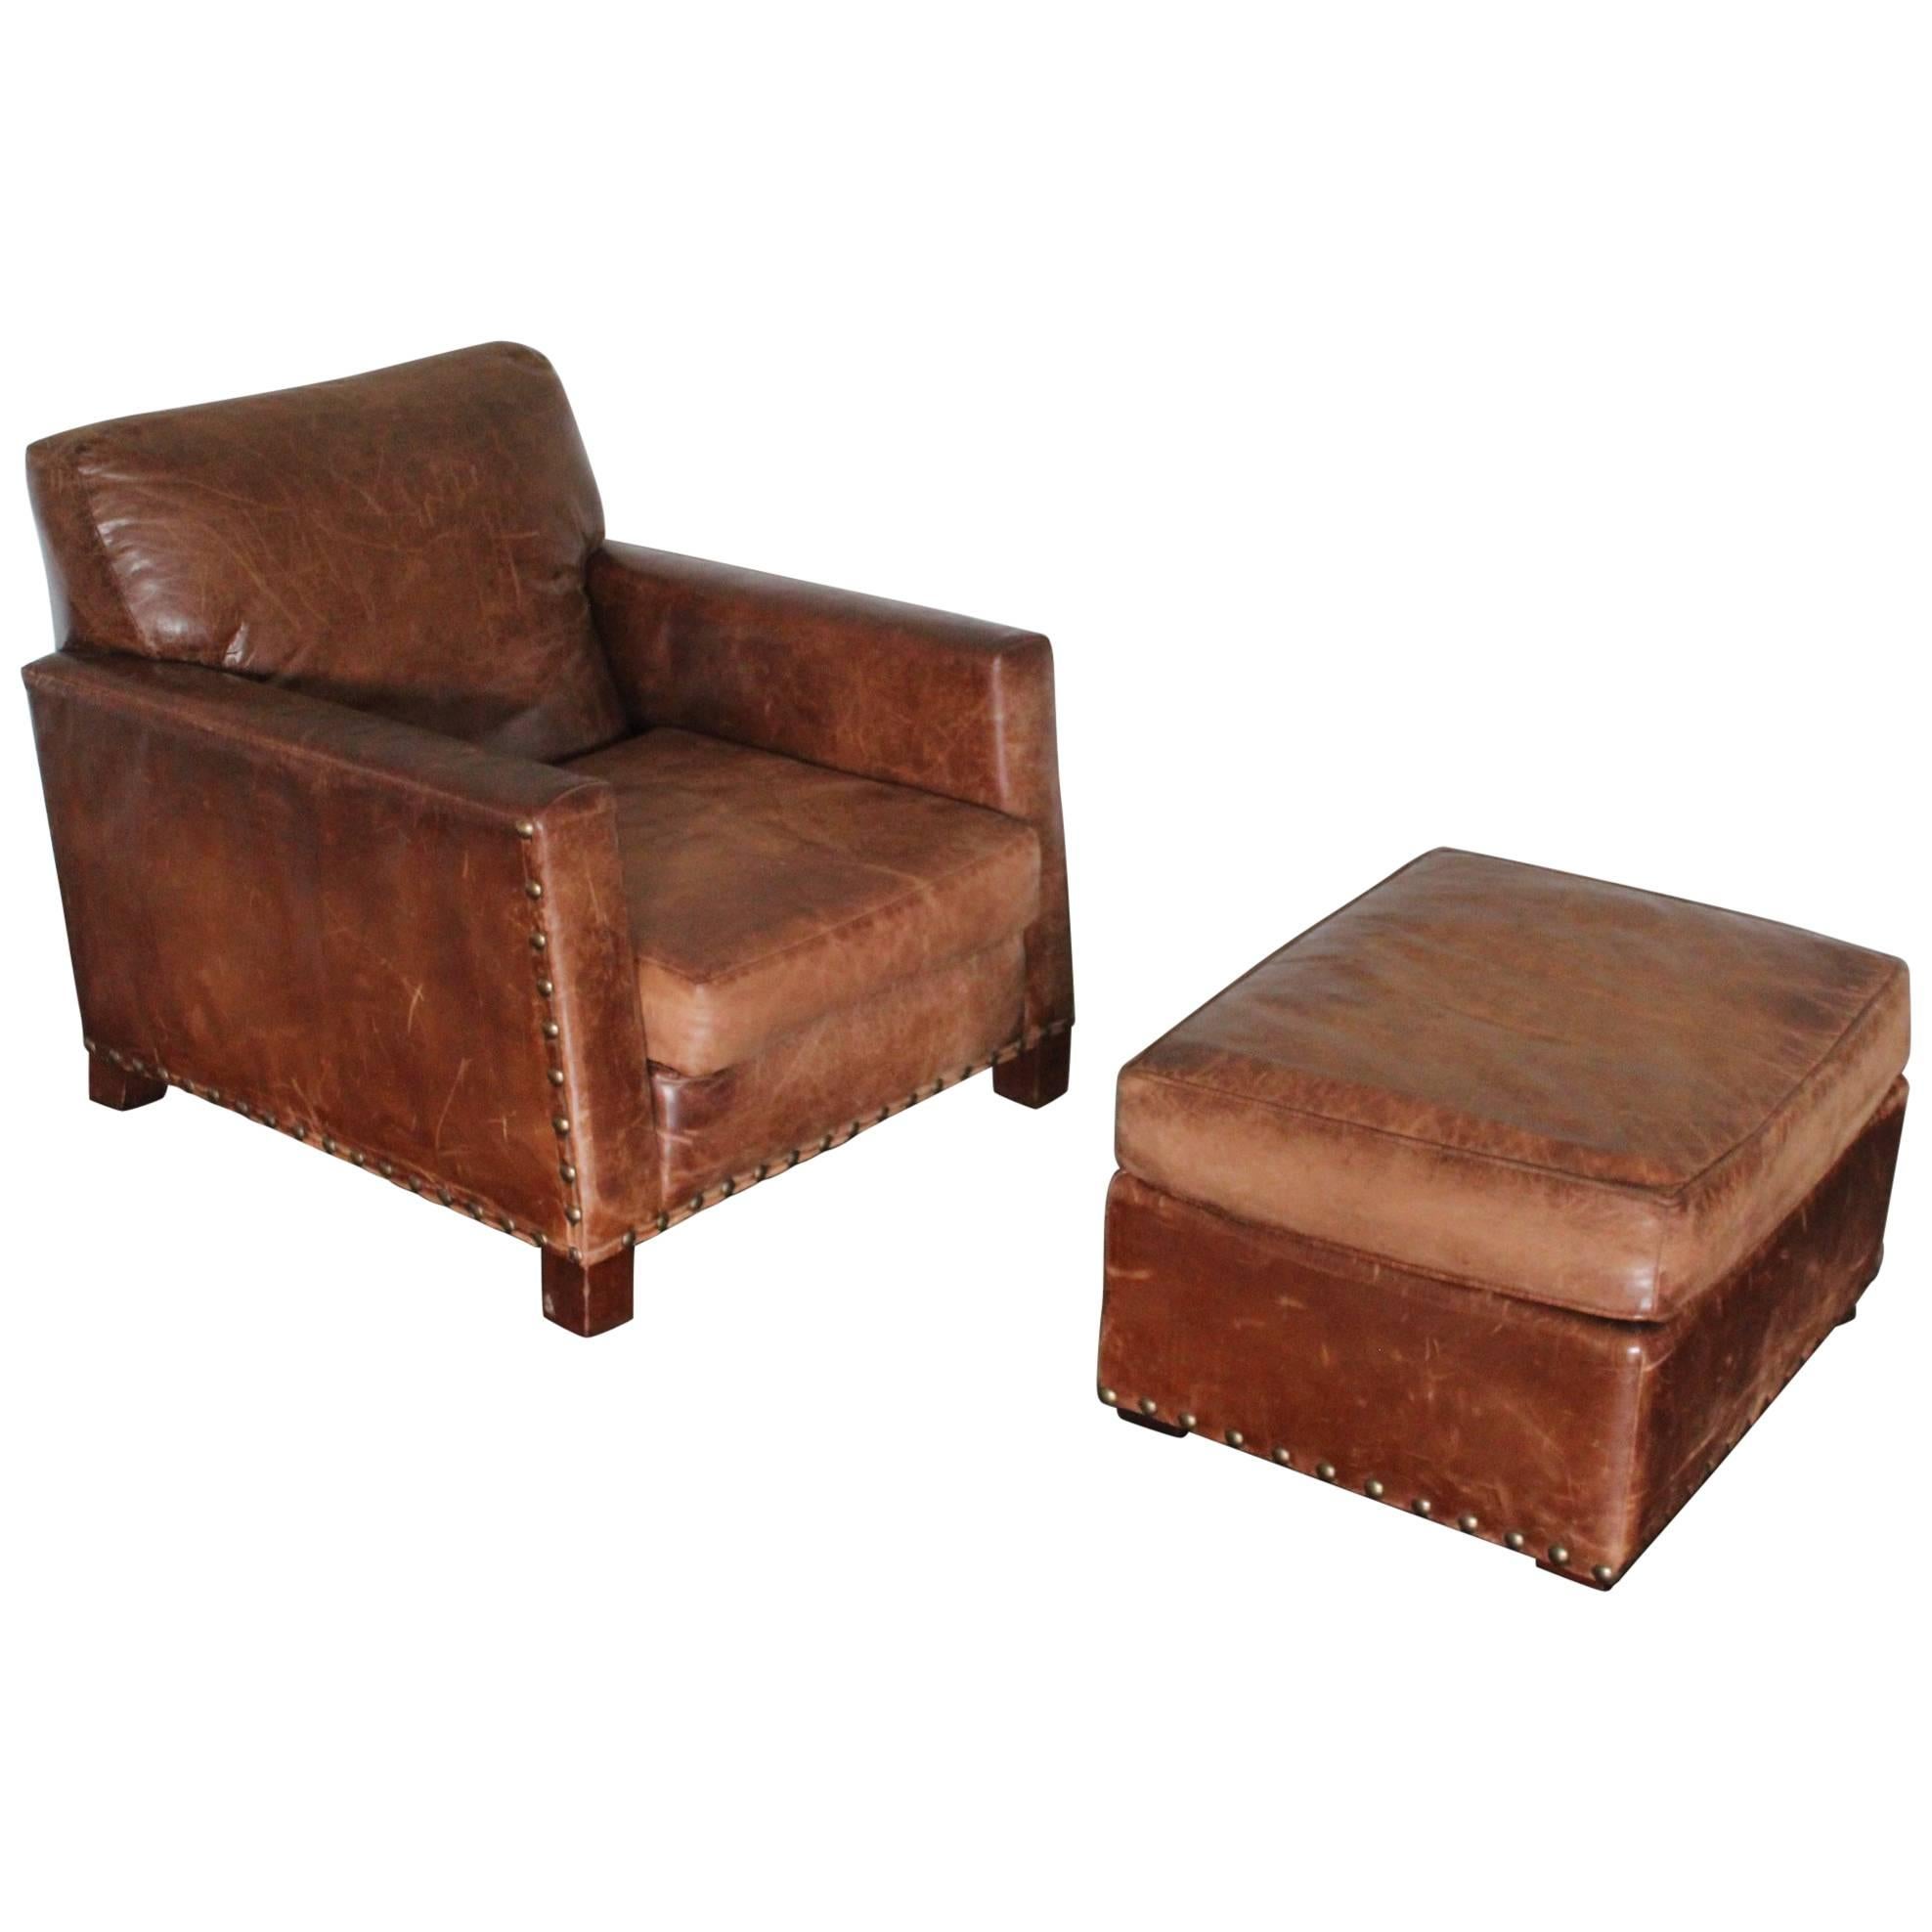 Ralph Lauren “Club” Armchair and Ottoman in Vintage Brown Leather